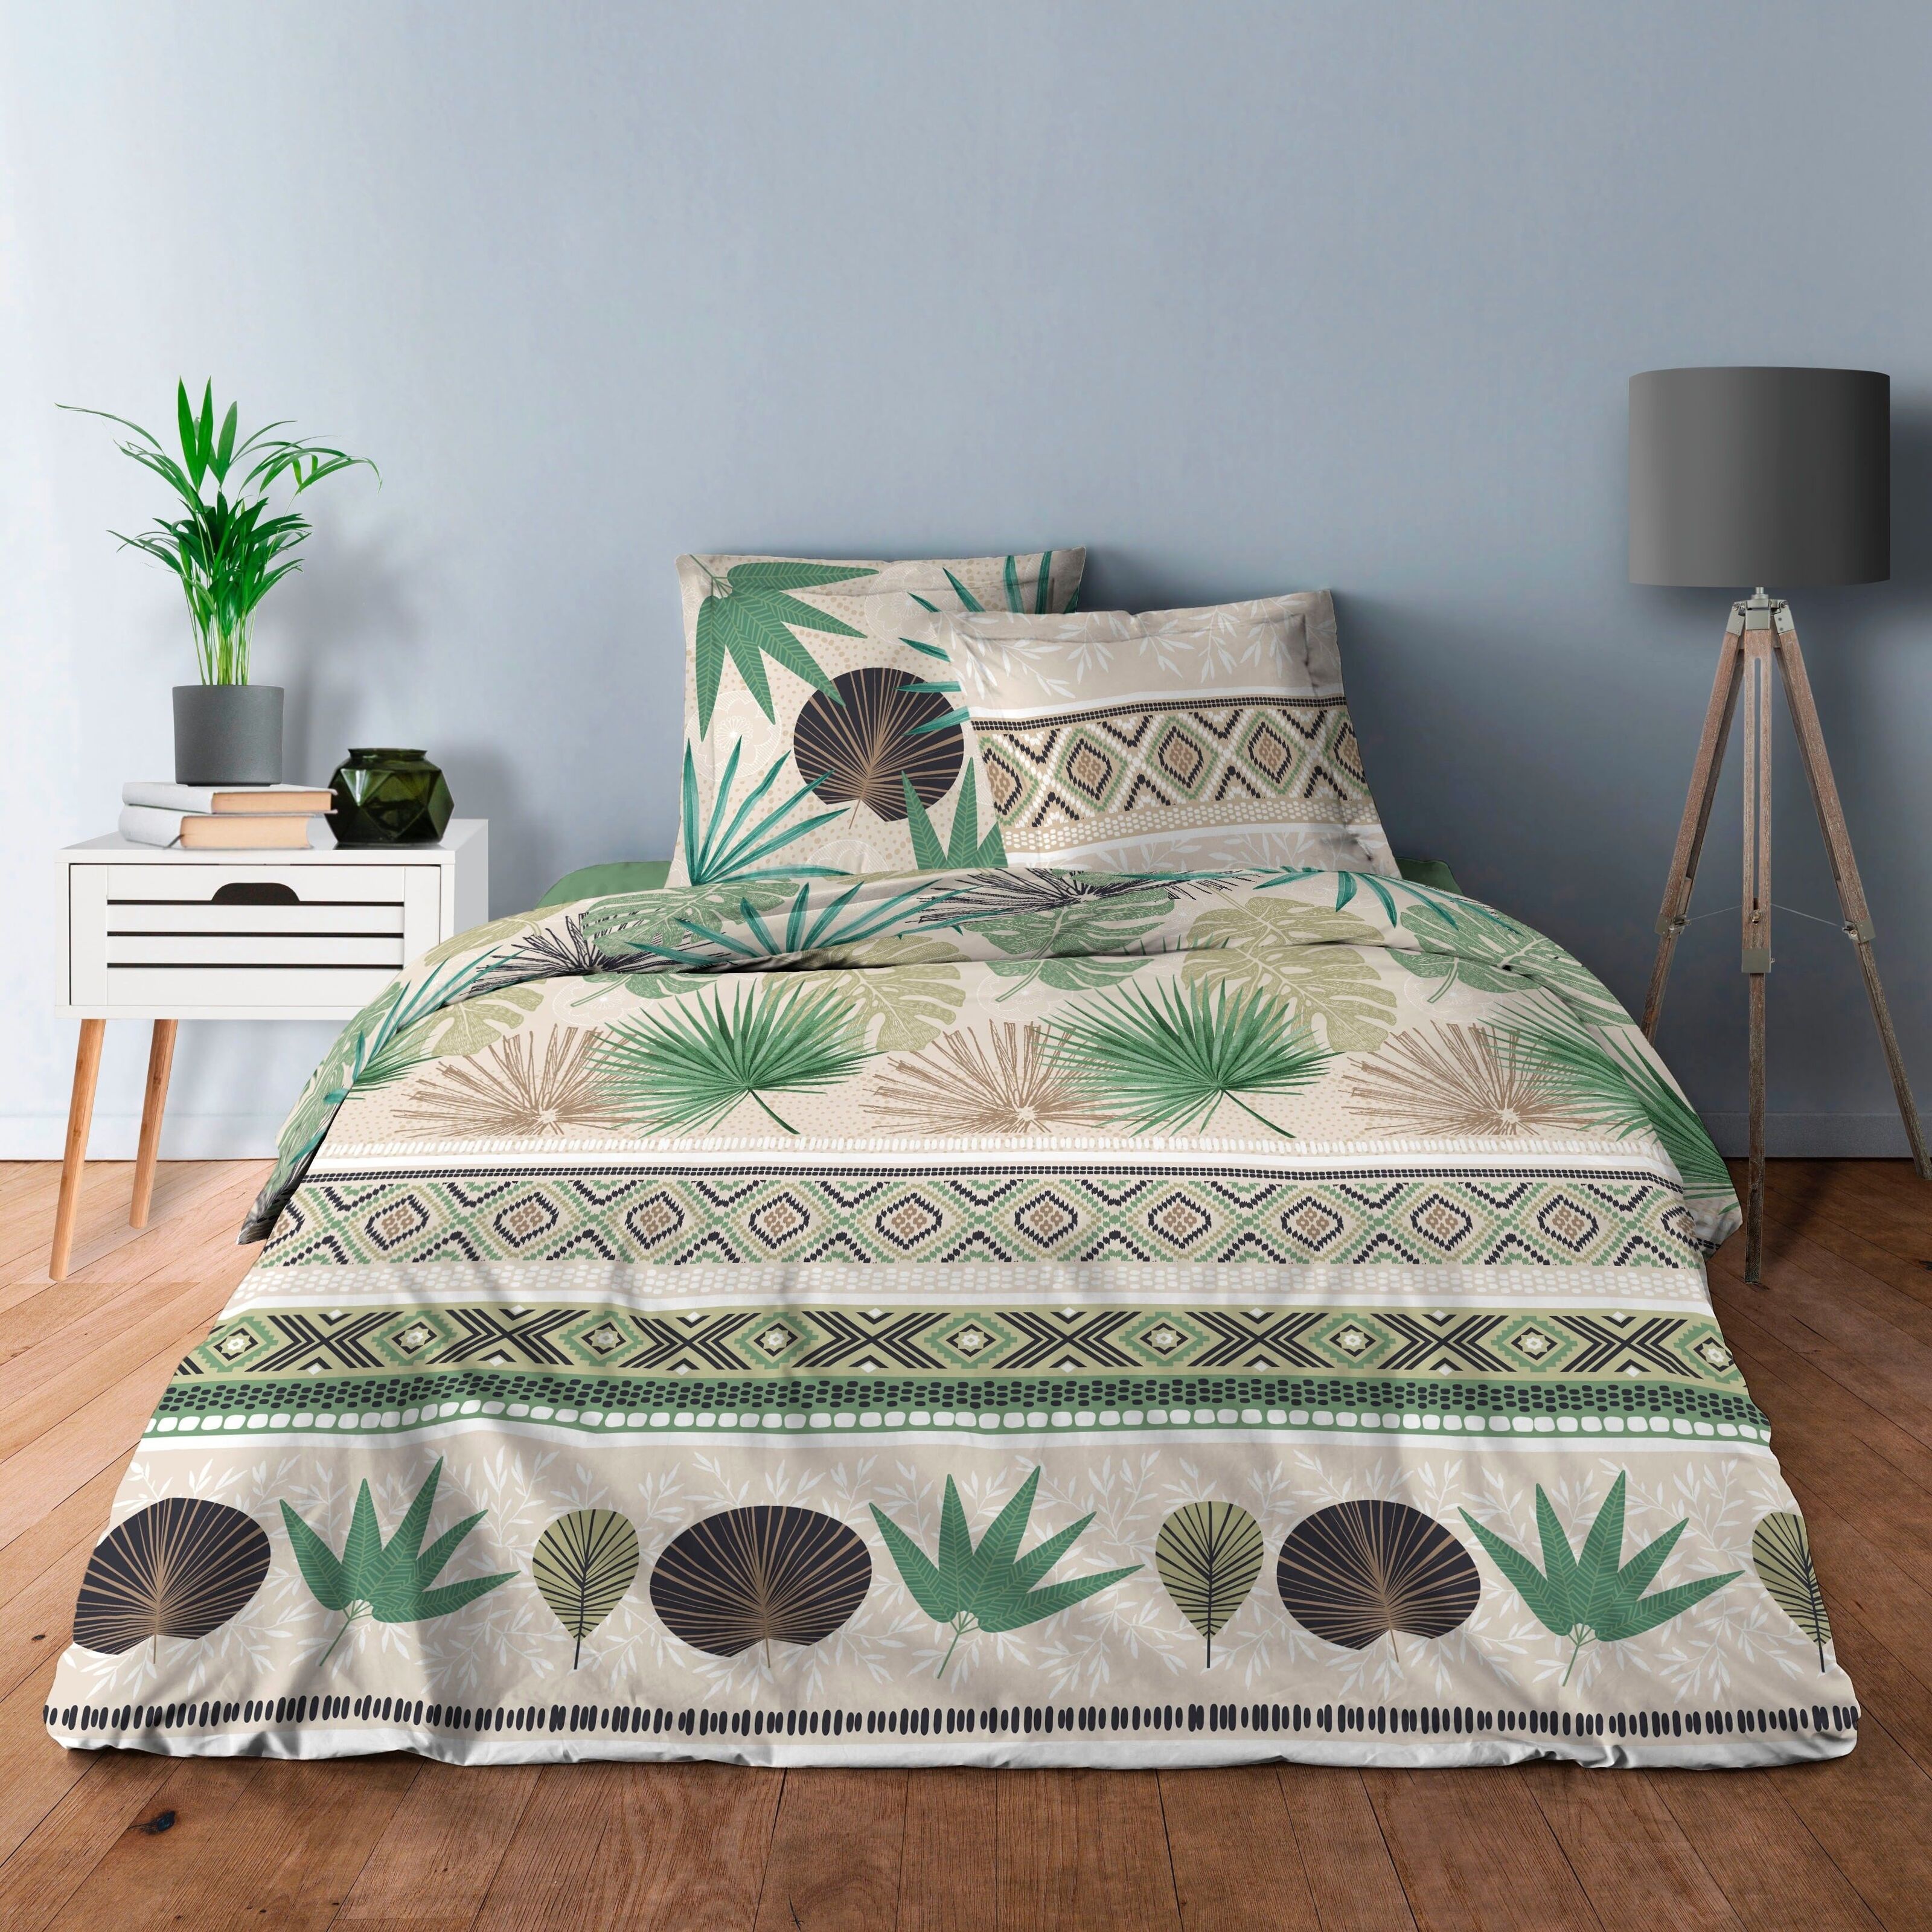 Buy wholesale 4 PIECE SET NATURE DUVET COVER WITH FITTED SHEET IN 140x190